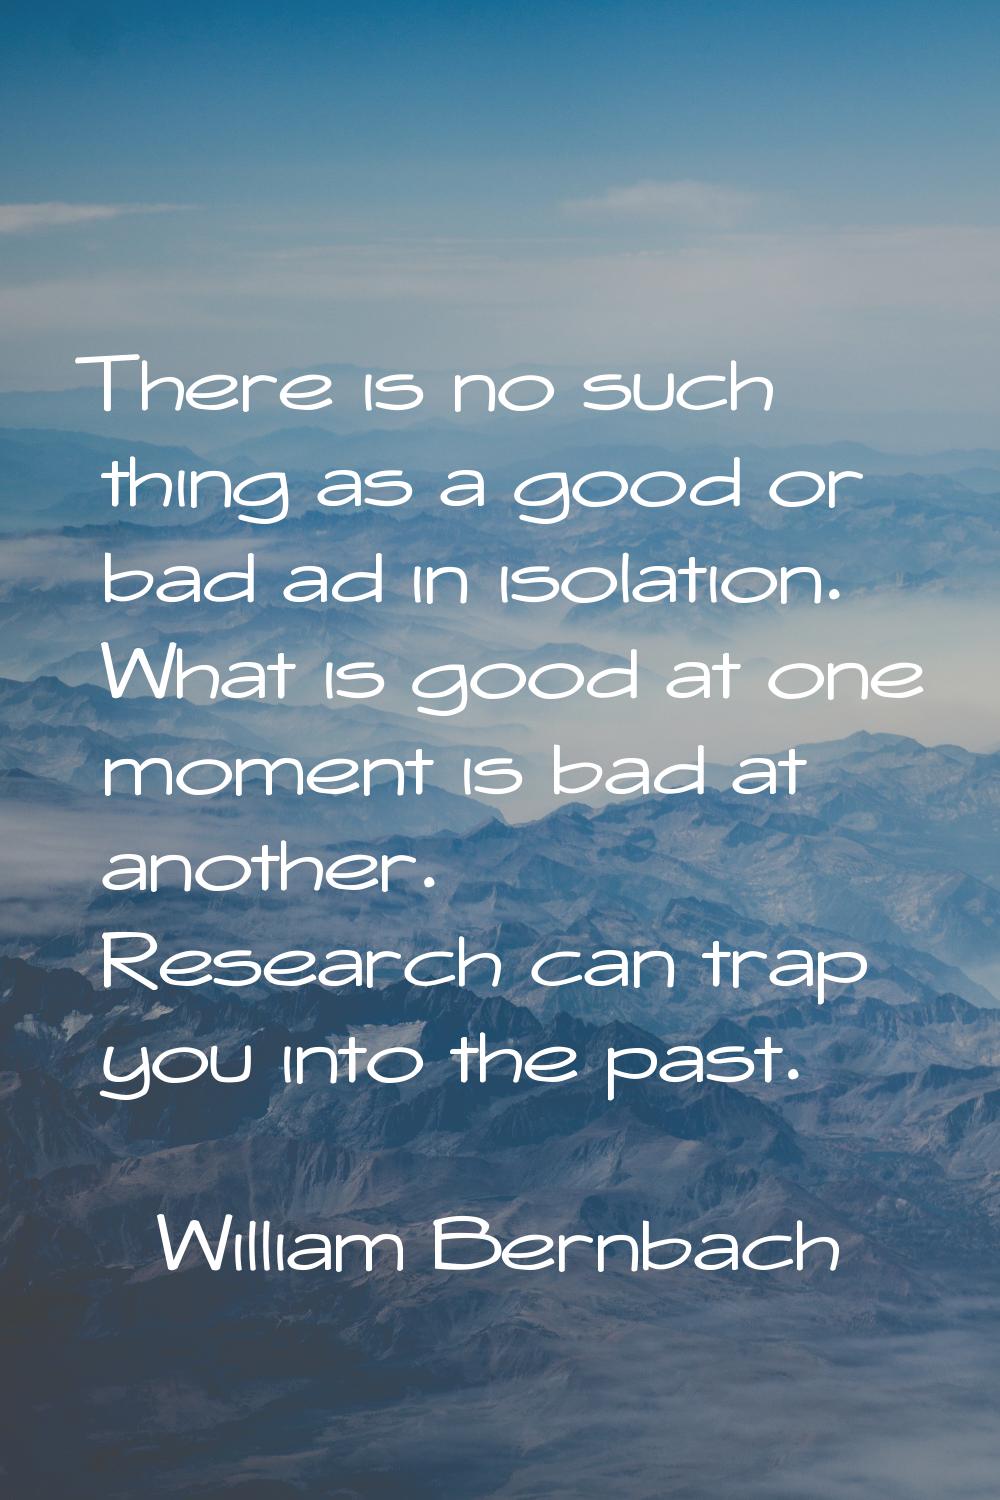 There is no such thing as a good or bad ad in isolation. What is good at one moment is bad at anoth